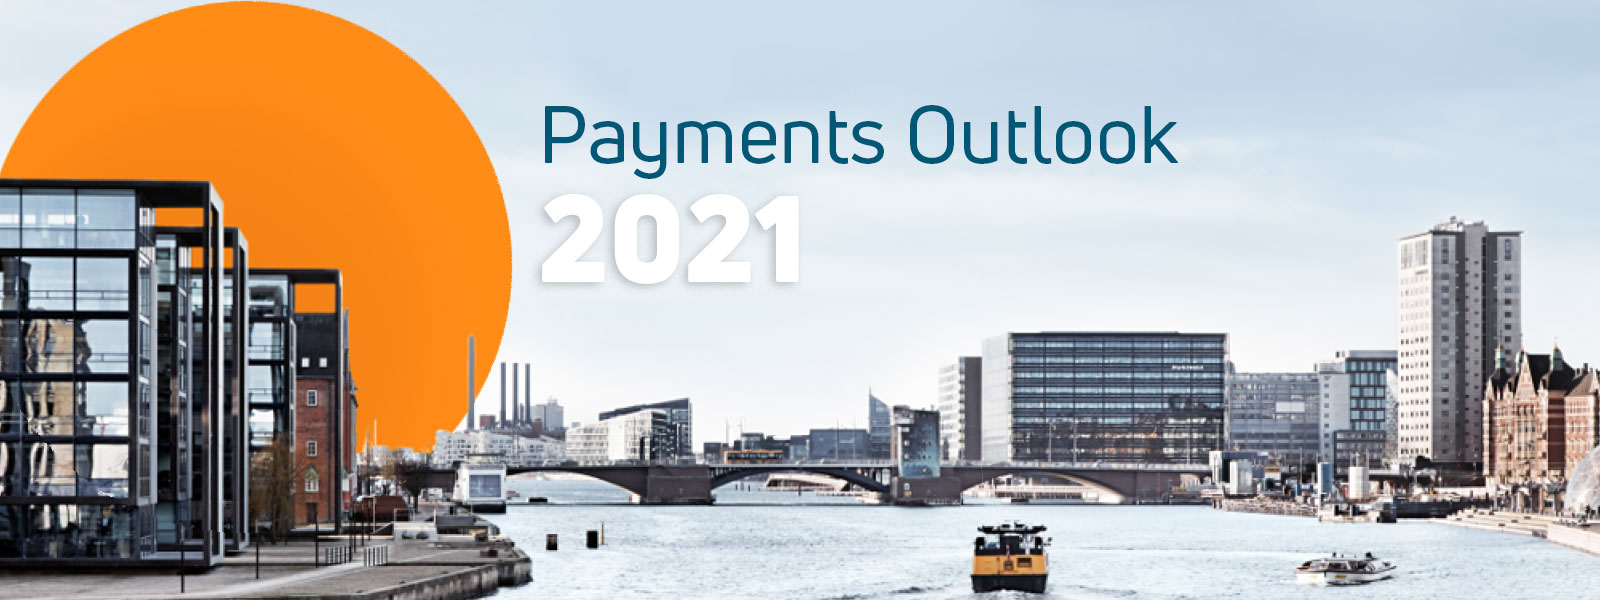 Payment Outlook 2021